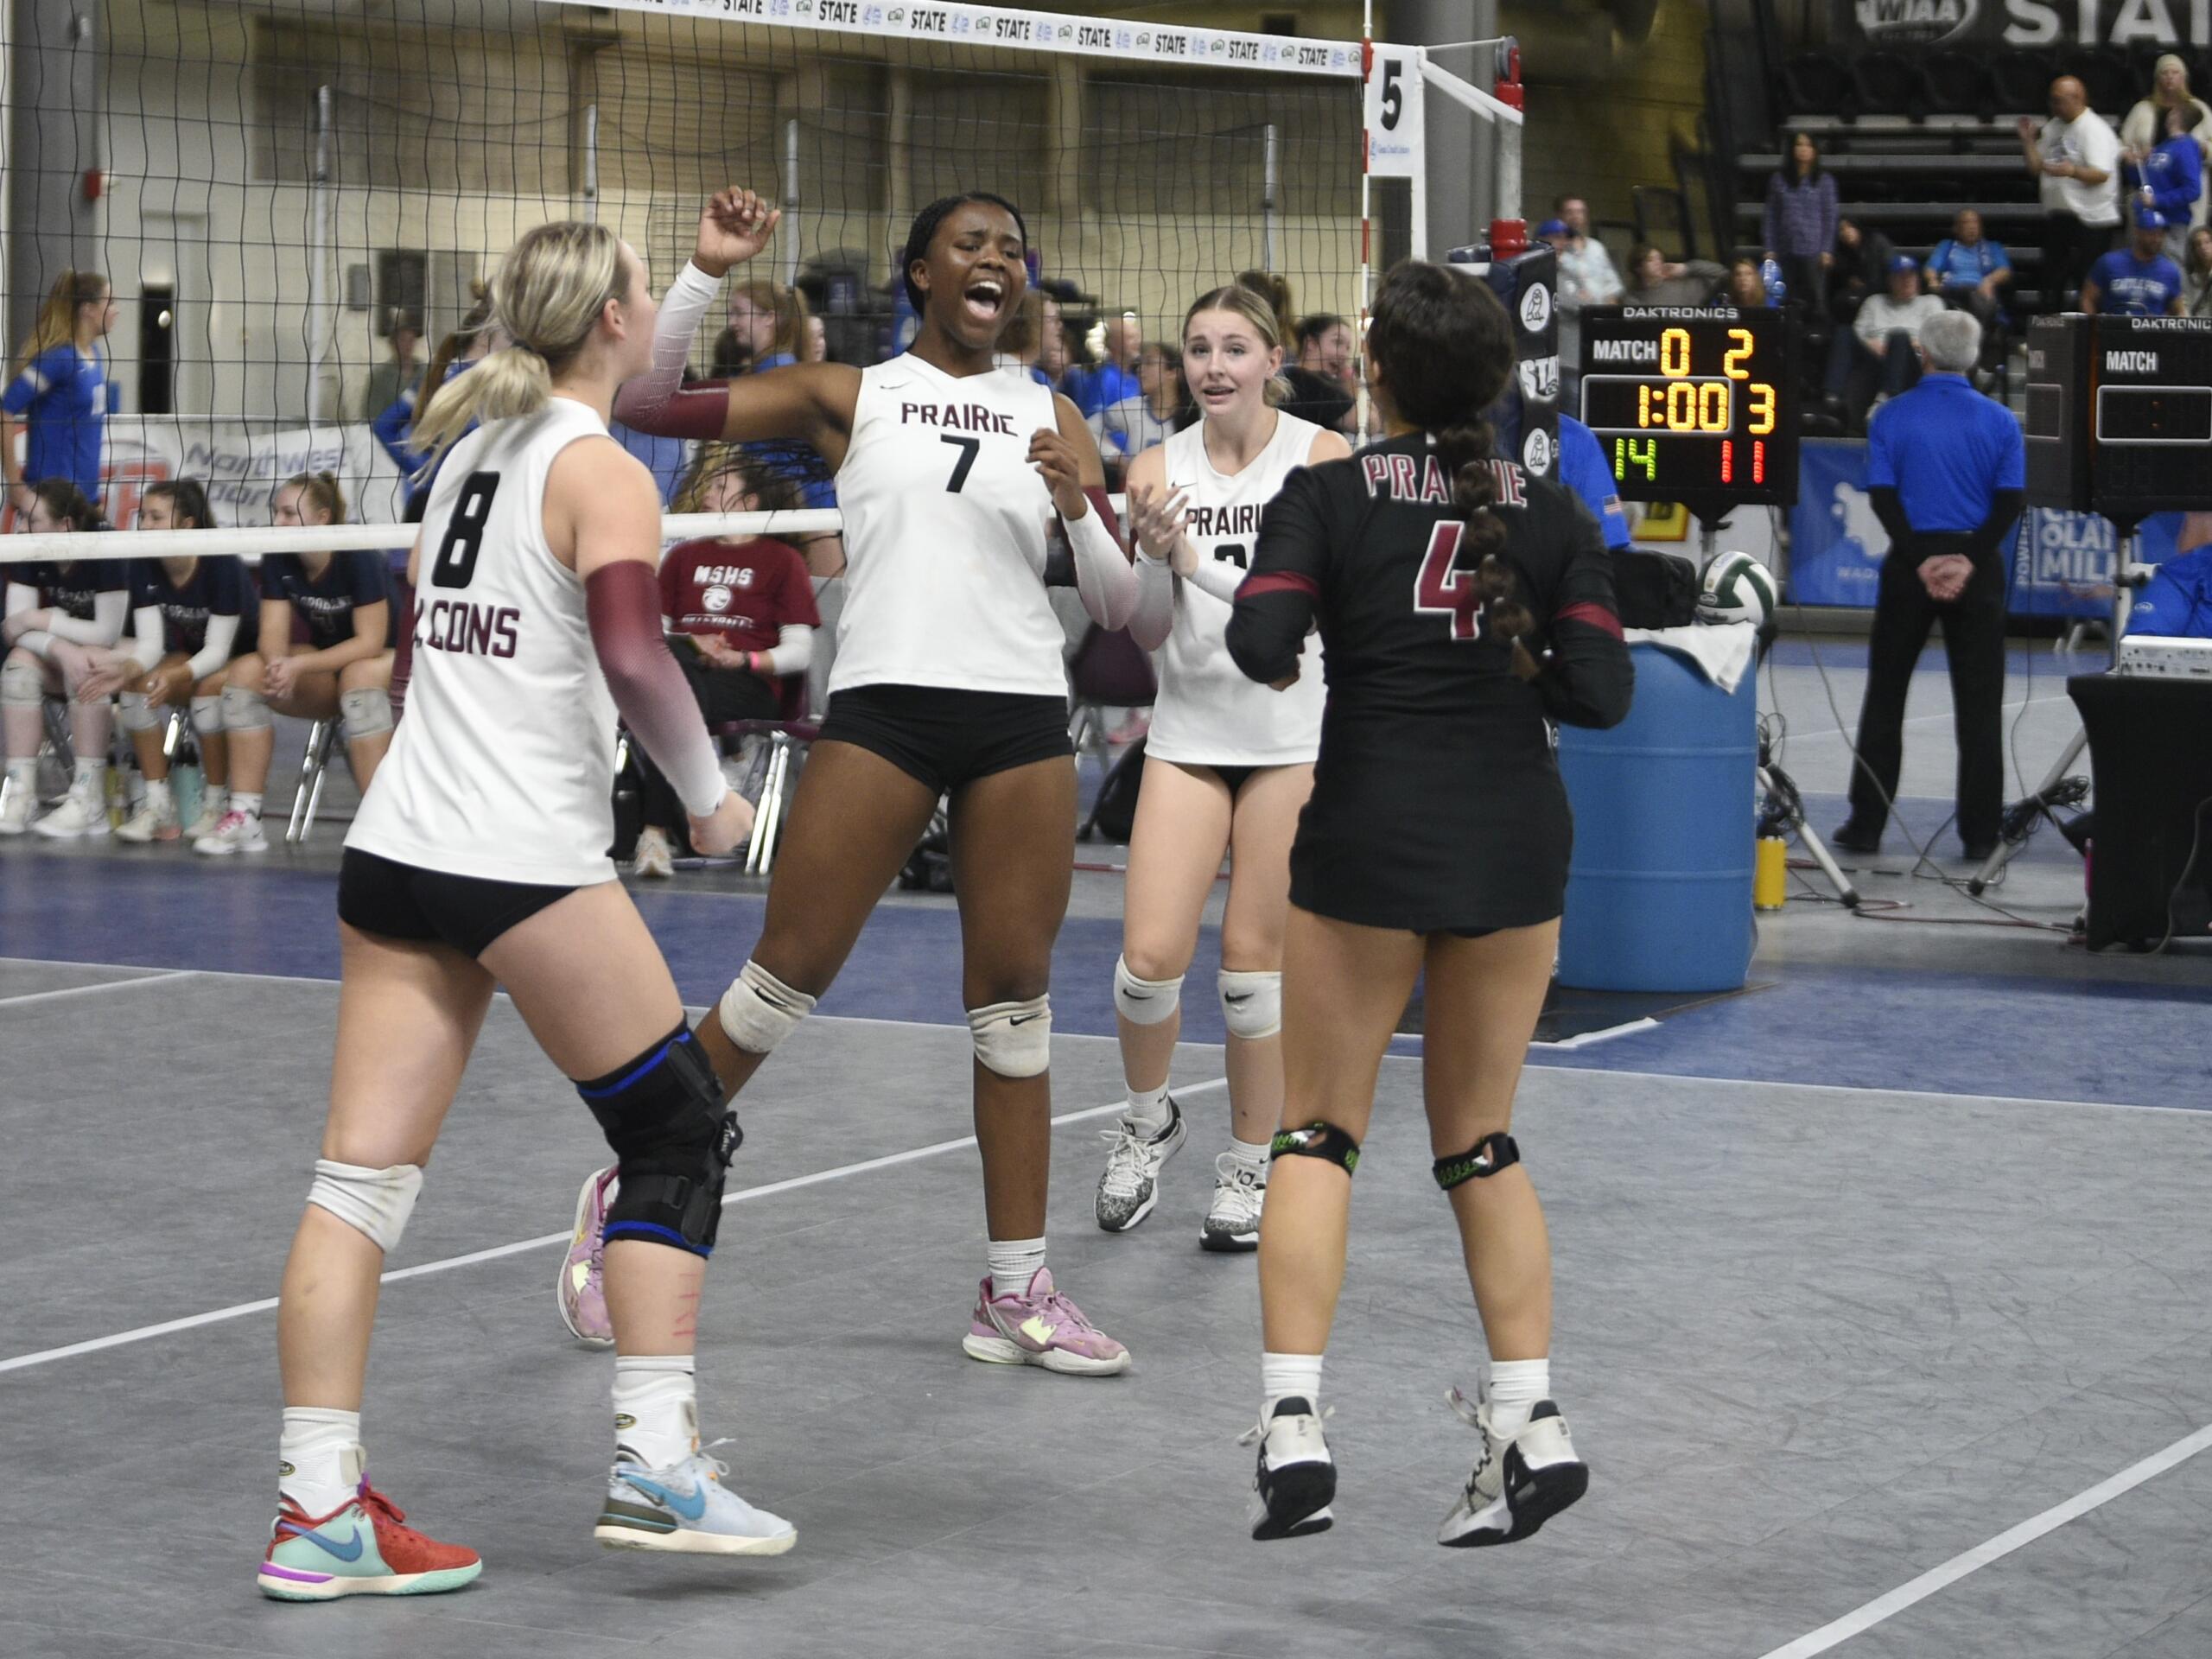 Prairie's Diamond Doutrive (7) celebrates with teammates during a Class 3A state volleyball tournament match against Mt. Spokane on Saturday, Nov.